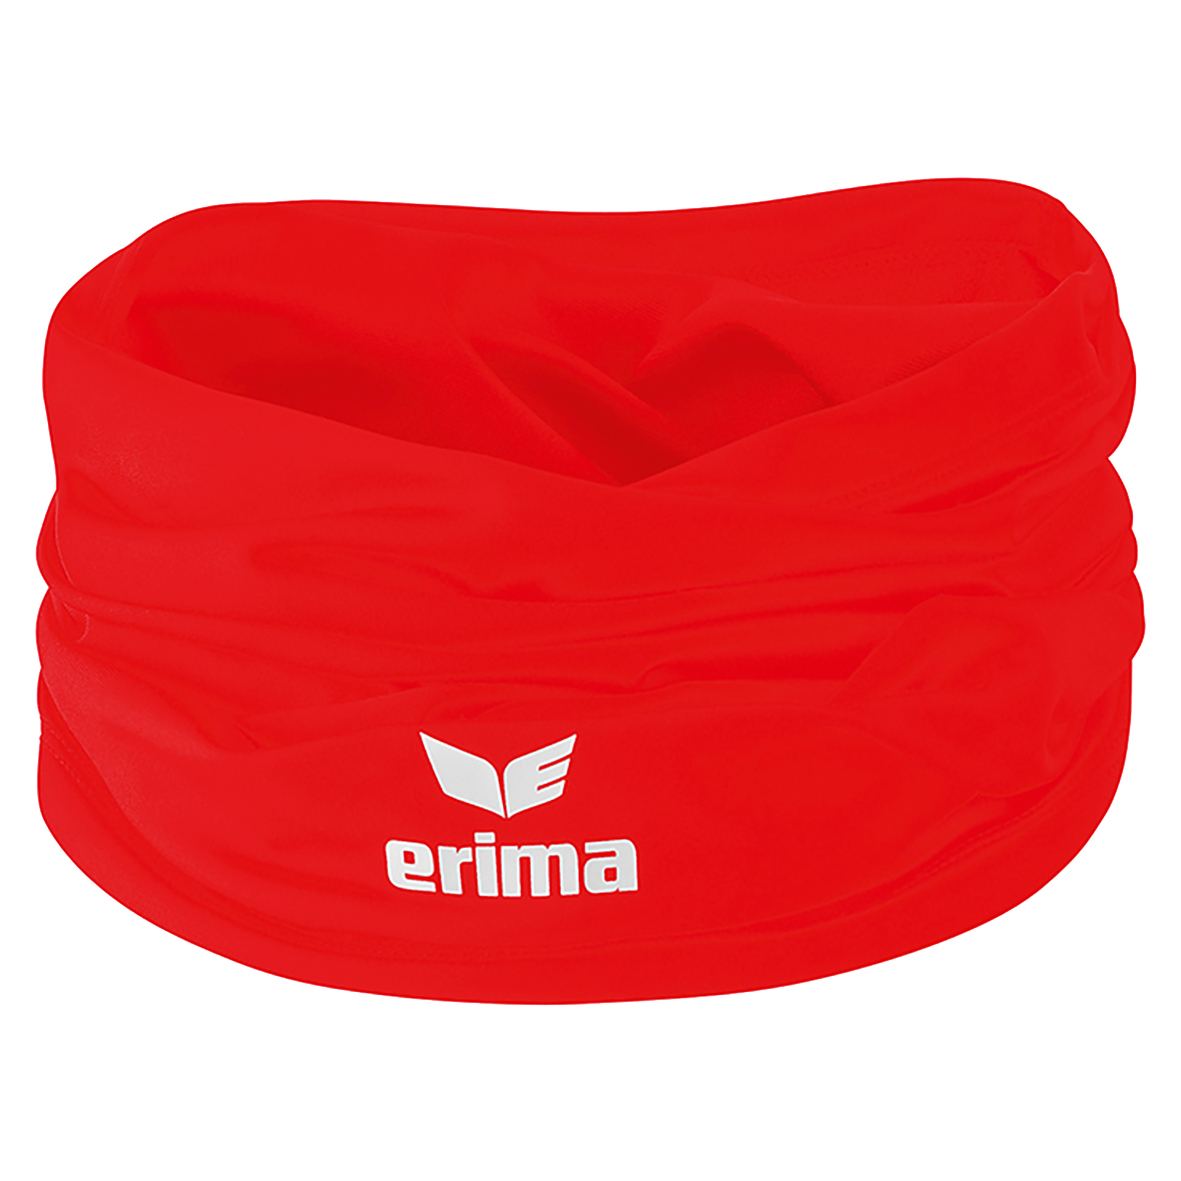 ERIMA NECK WARMERS, RED.